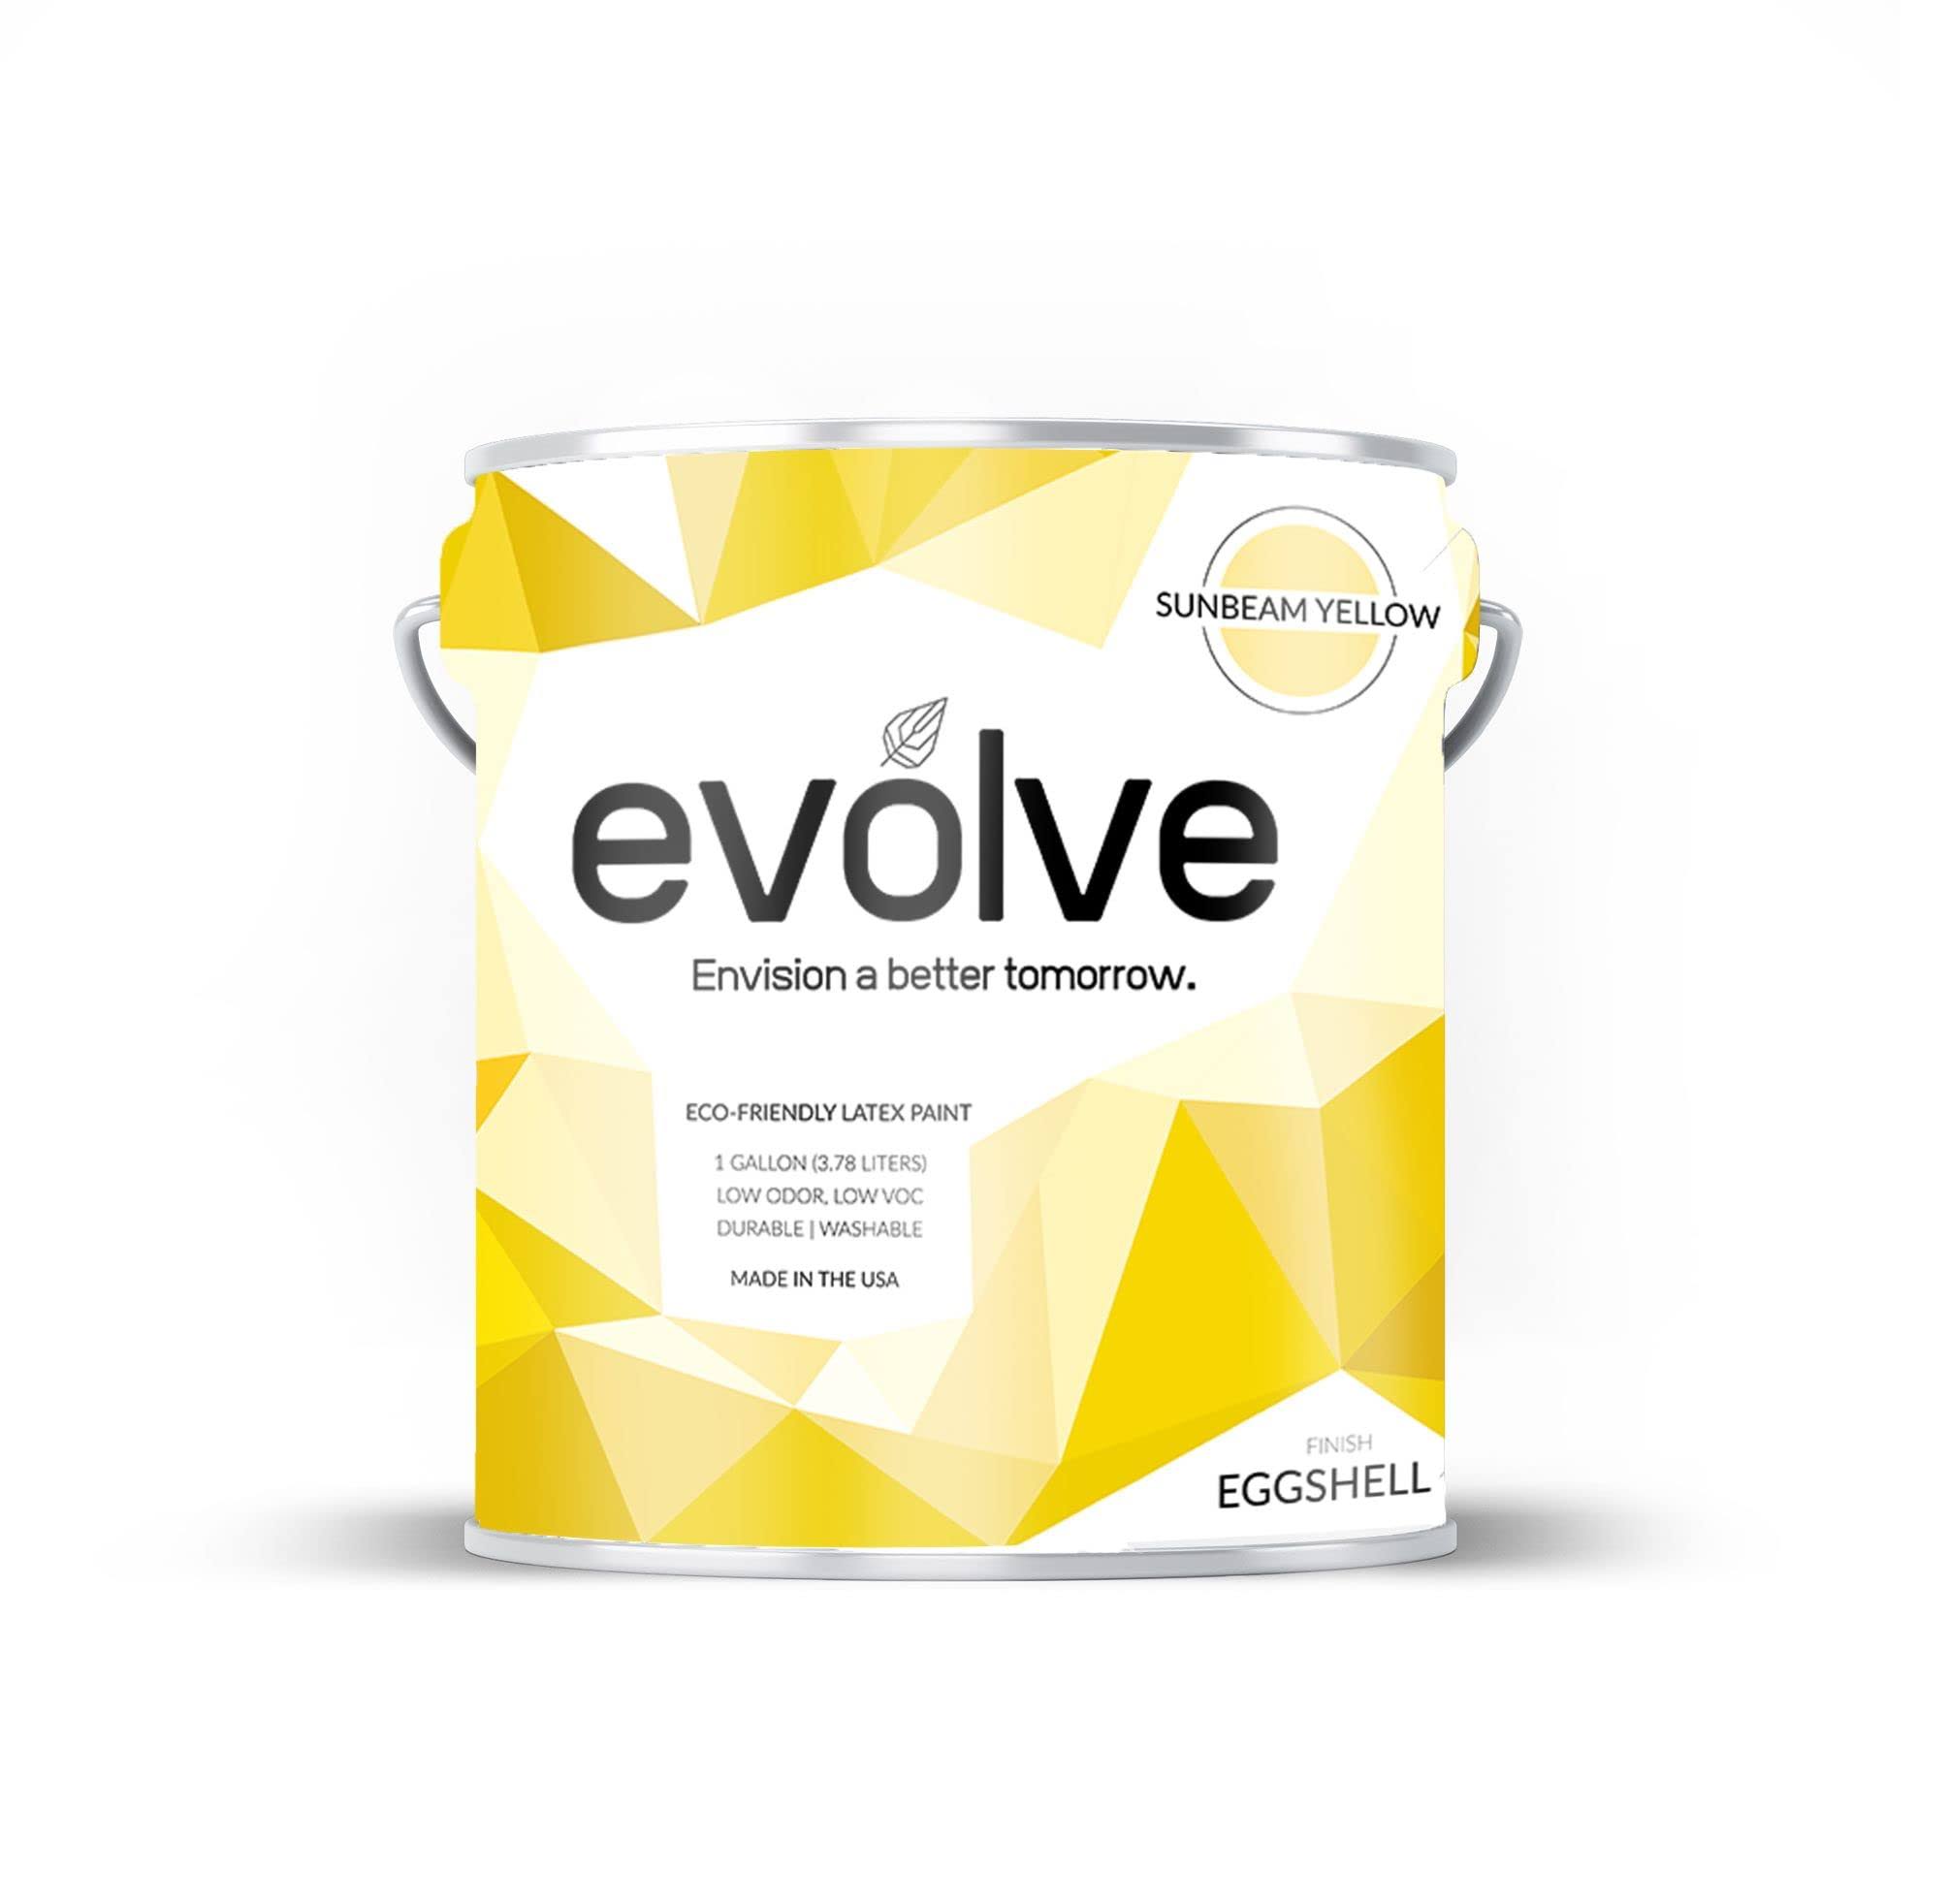 Evolve Paint & Primer: Environment-friendly, Low Sheen with One-Coat Coverage for Interior & Exterior Surfaces (Sunbeam Yellow, 1-Gallon)